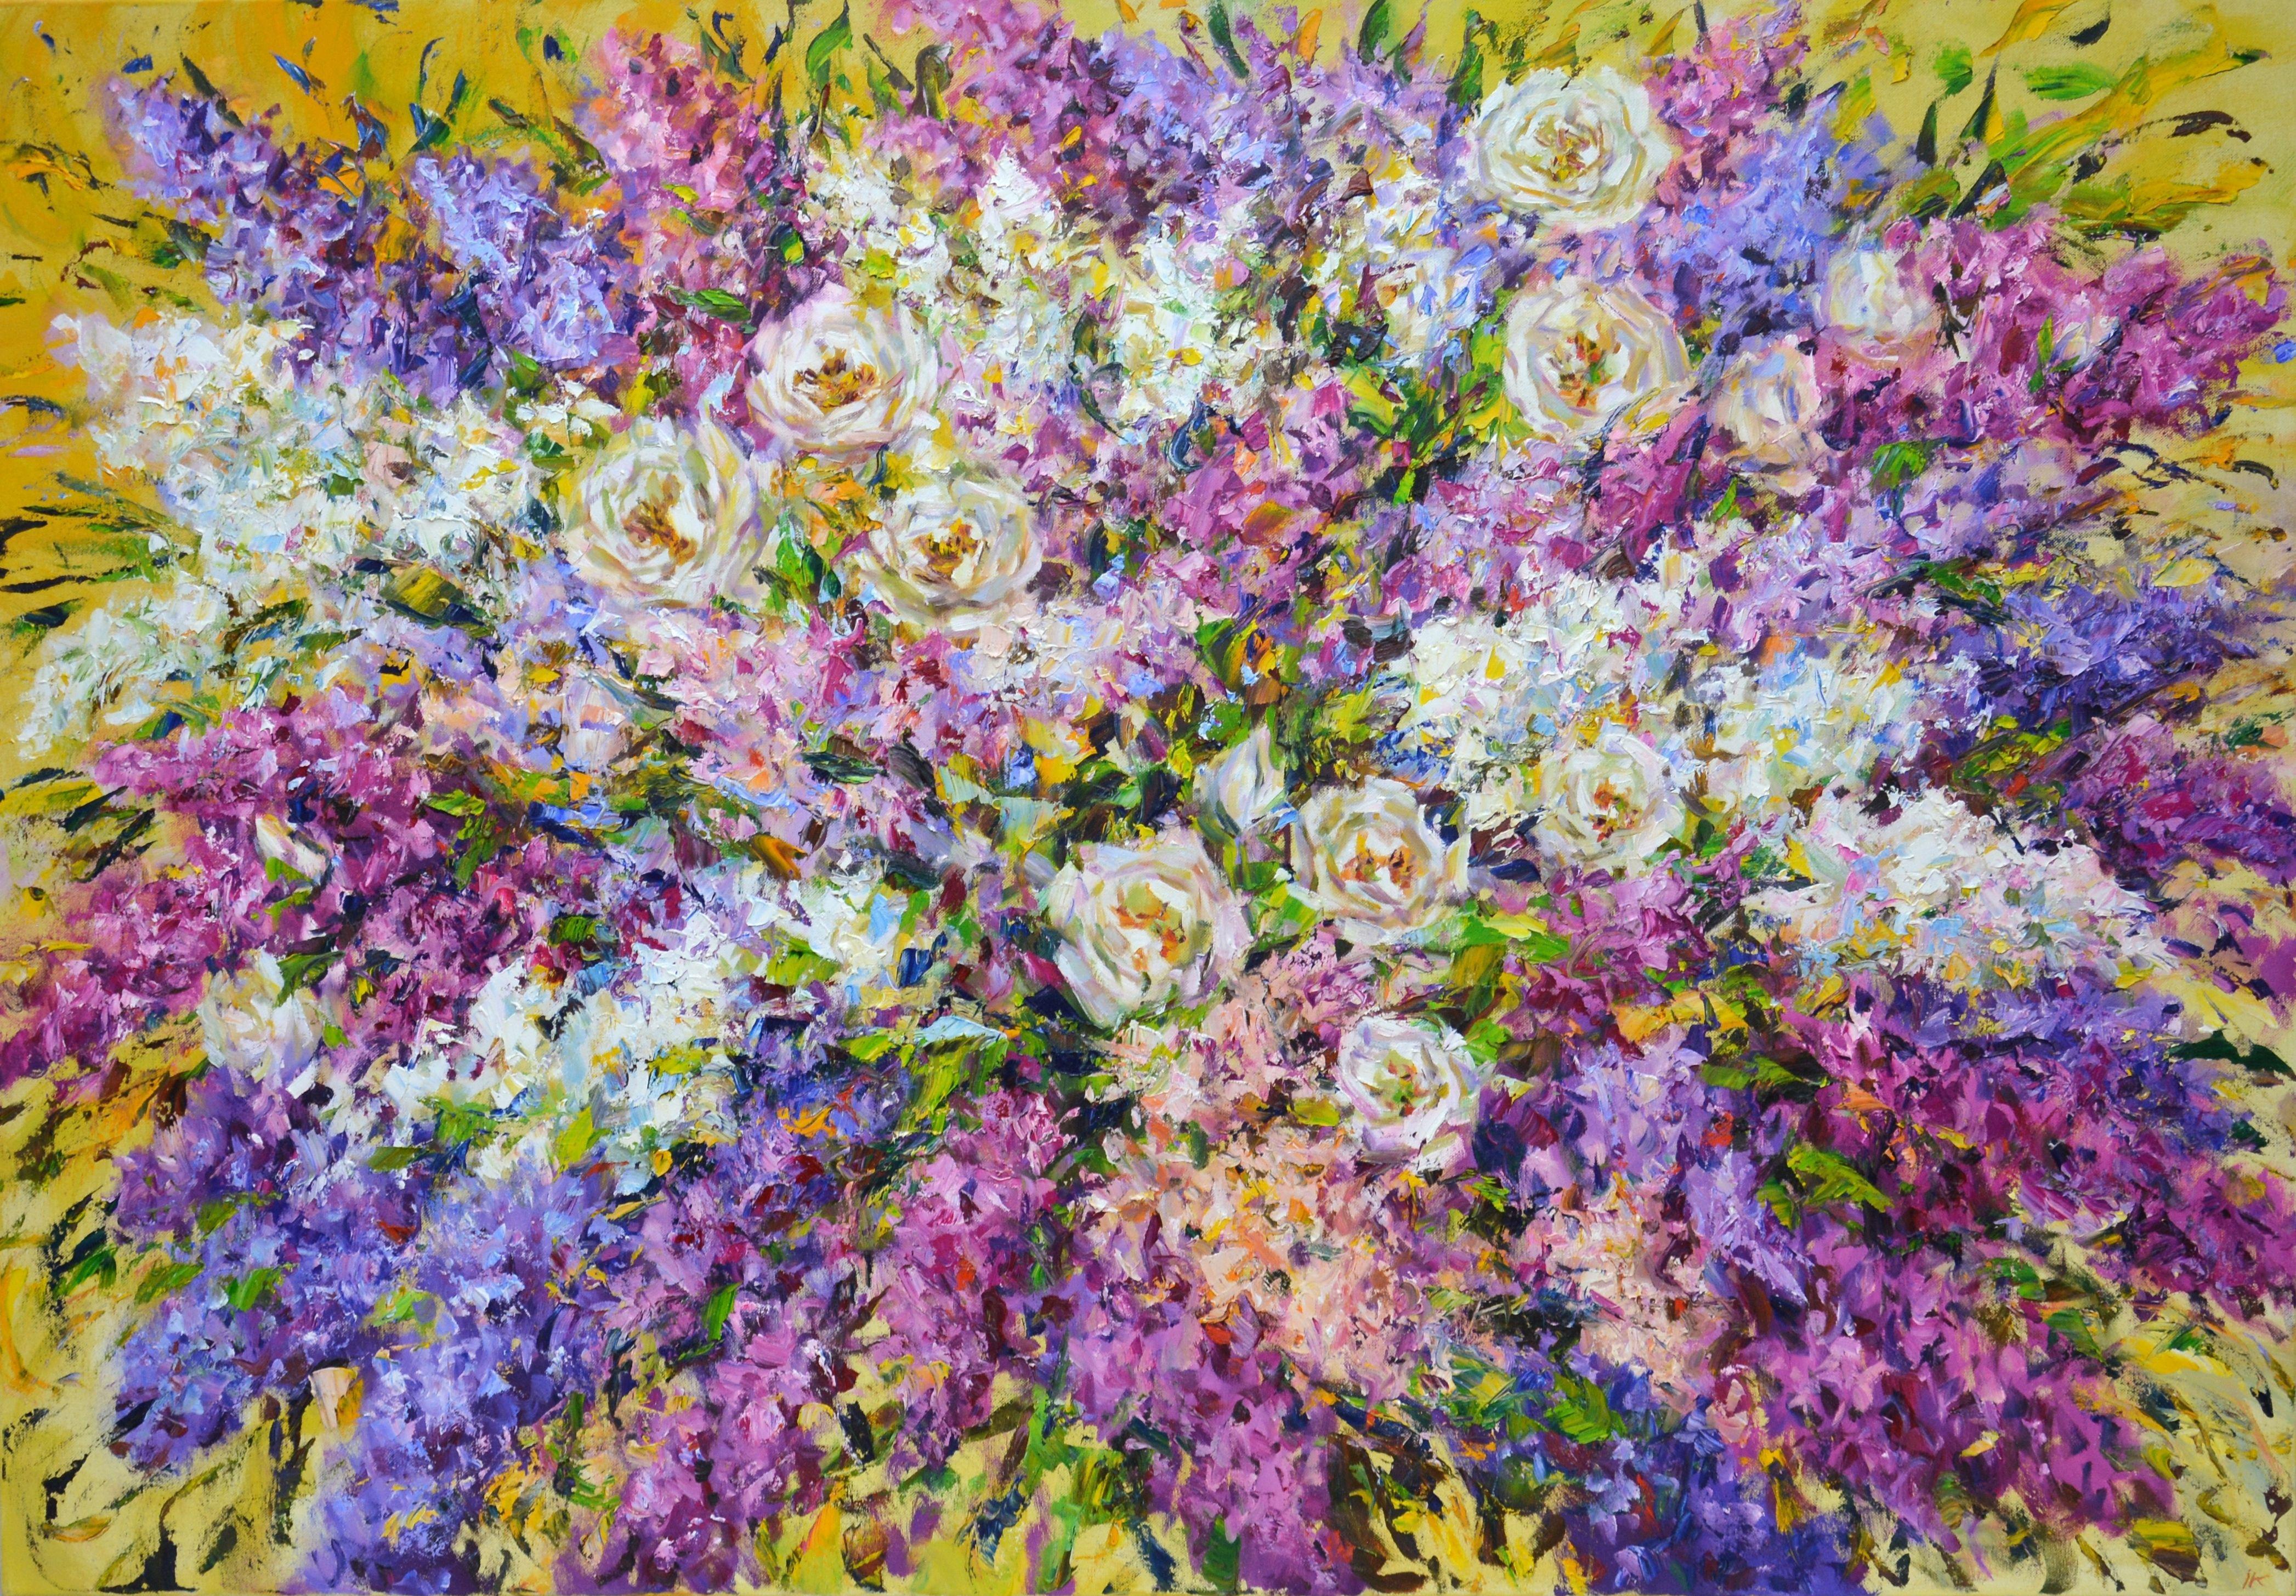 Large flower arrangement on a yellow background. Lavender, lilac, white roses.  Part of an ongoing series of floral still lifes. The painting has good spatial quality, and bright colors cause childish happiness. In the style of impressionism,